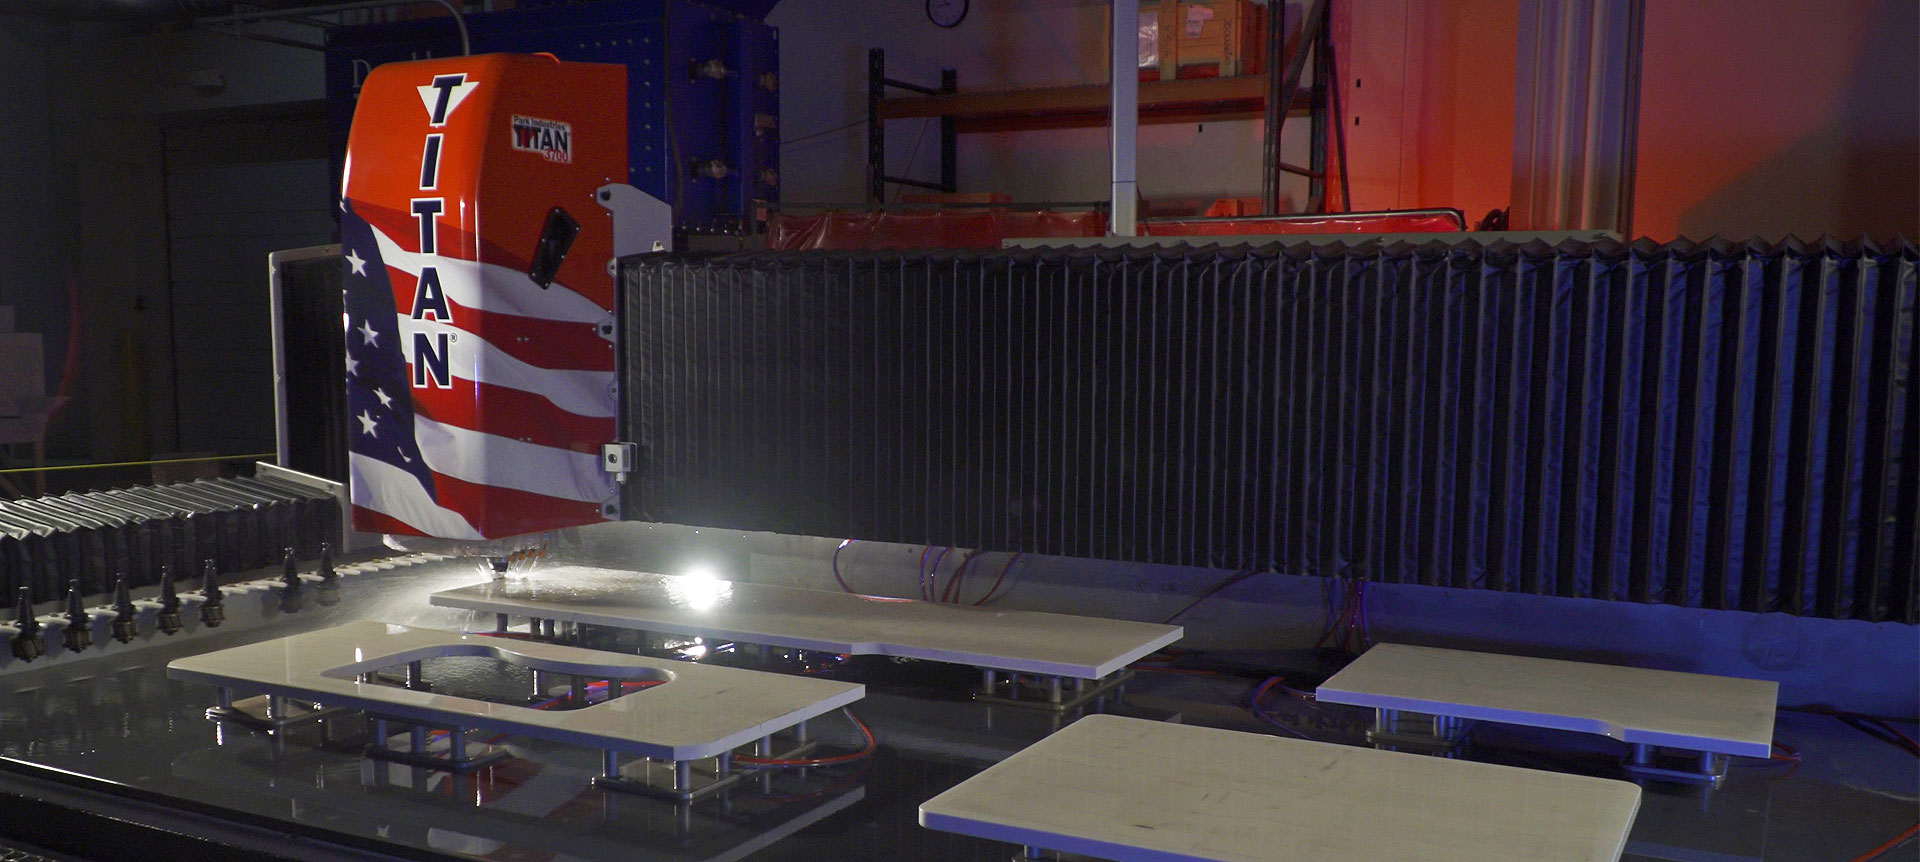 CNC Stone Fabrication Machines and Equipment | American Made by Park Industries